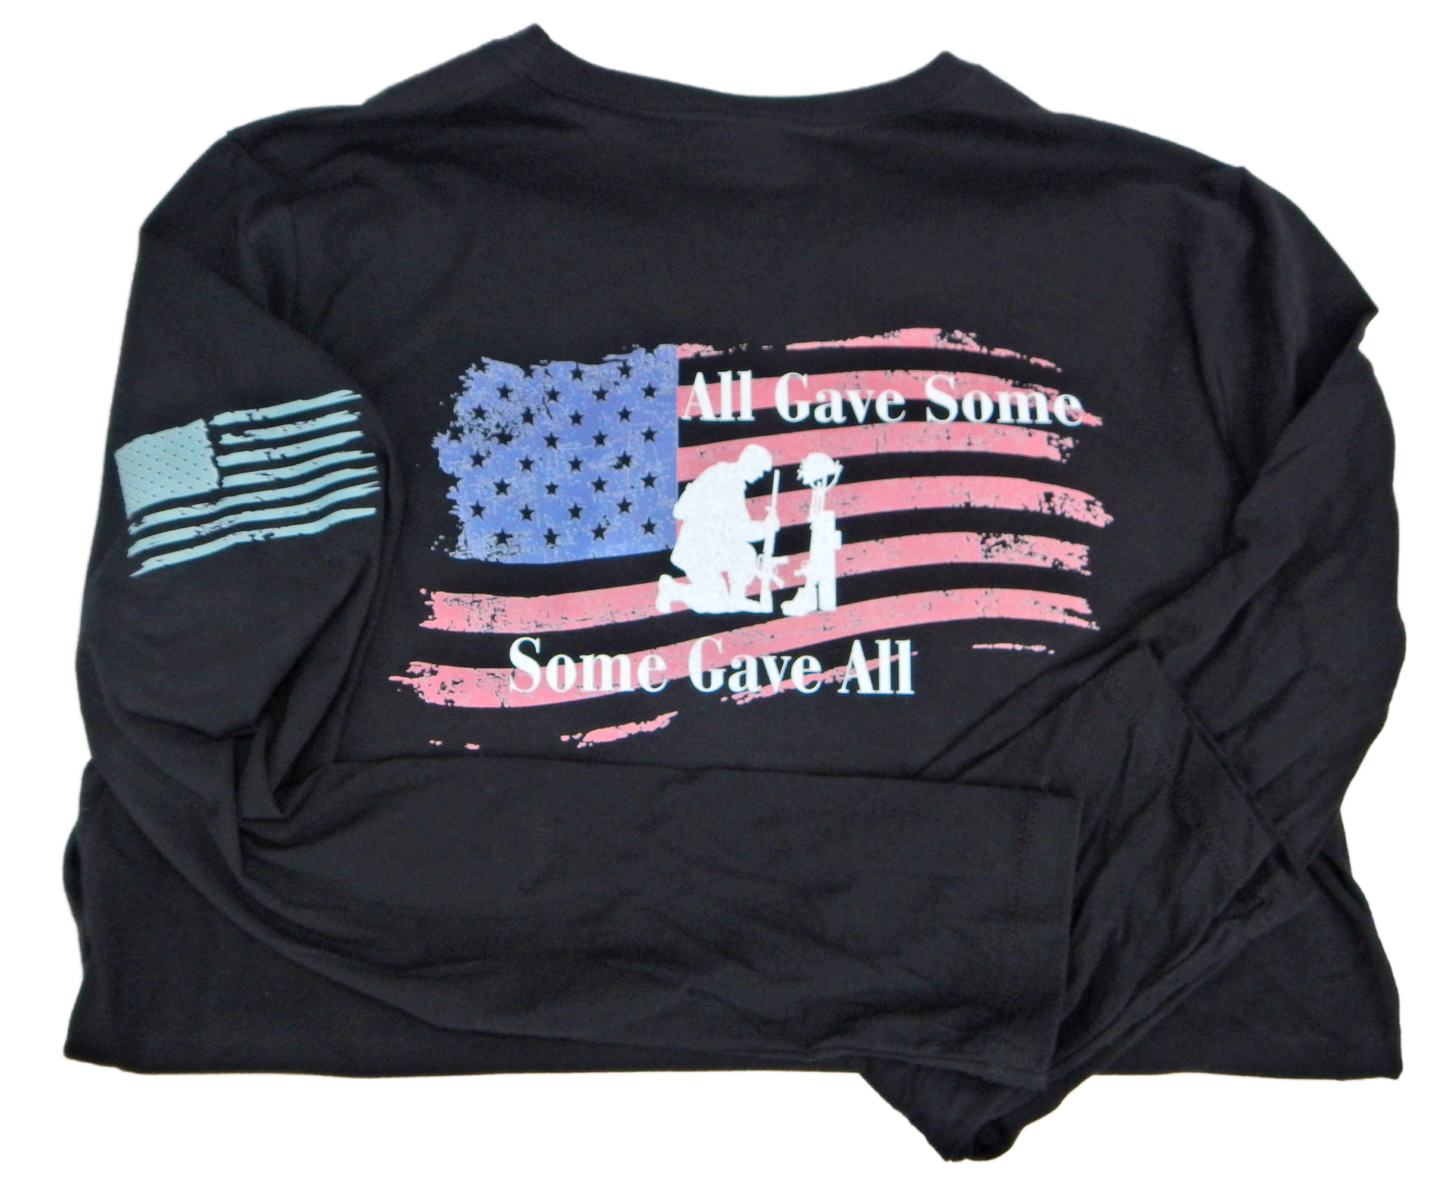 All Gave Some, Some Gave All Long Sleeve Tee